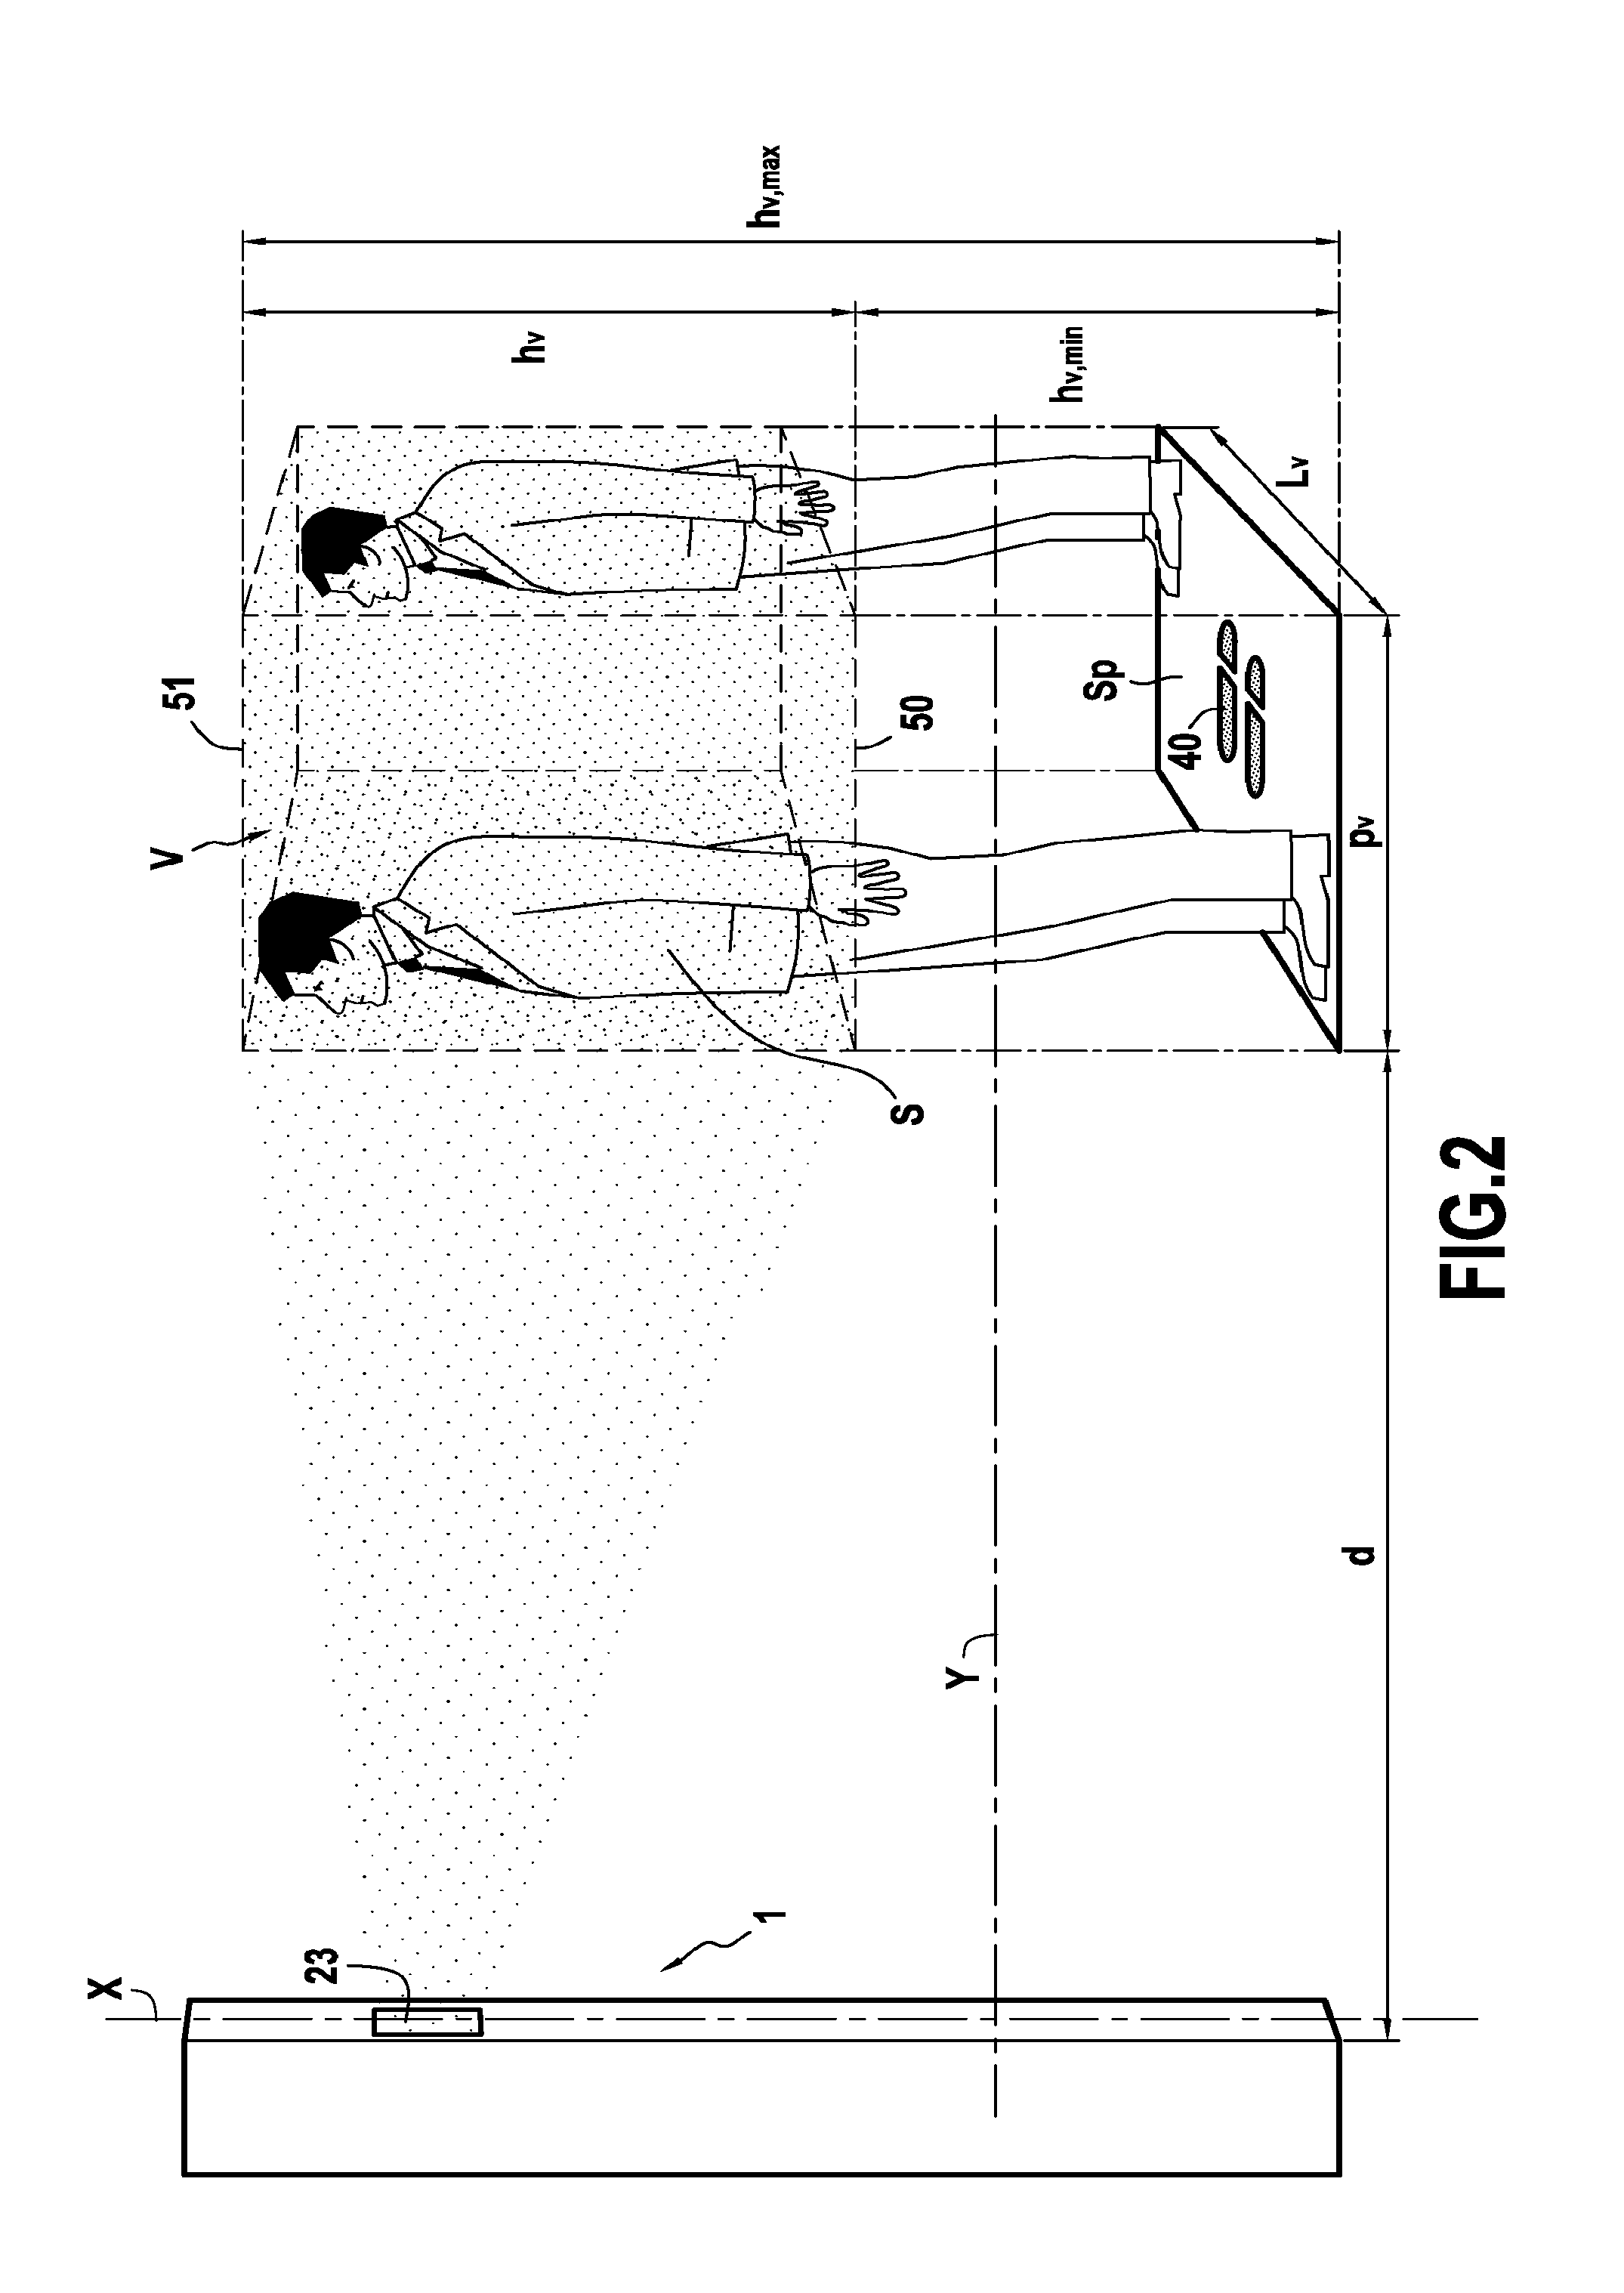 Device for use in identifying or authenticating a subject